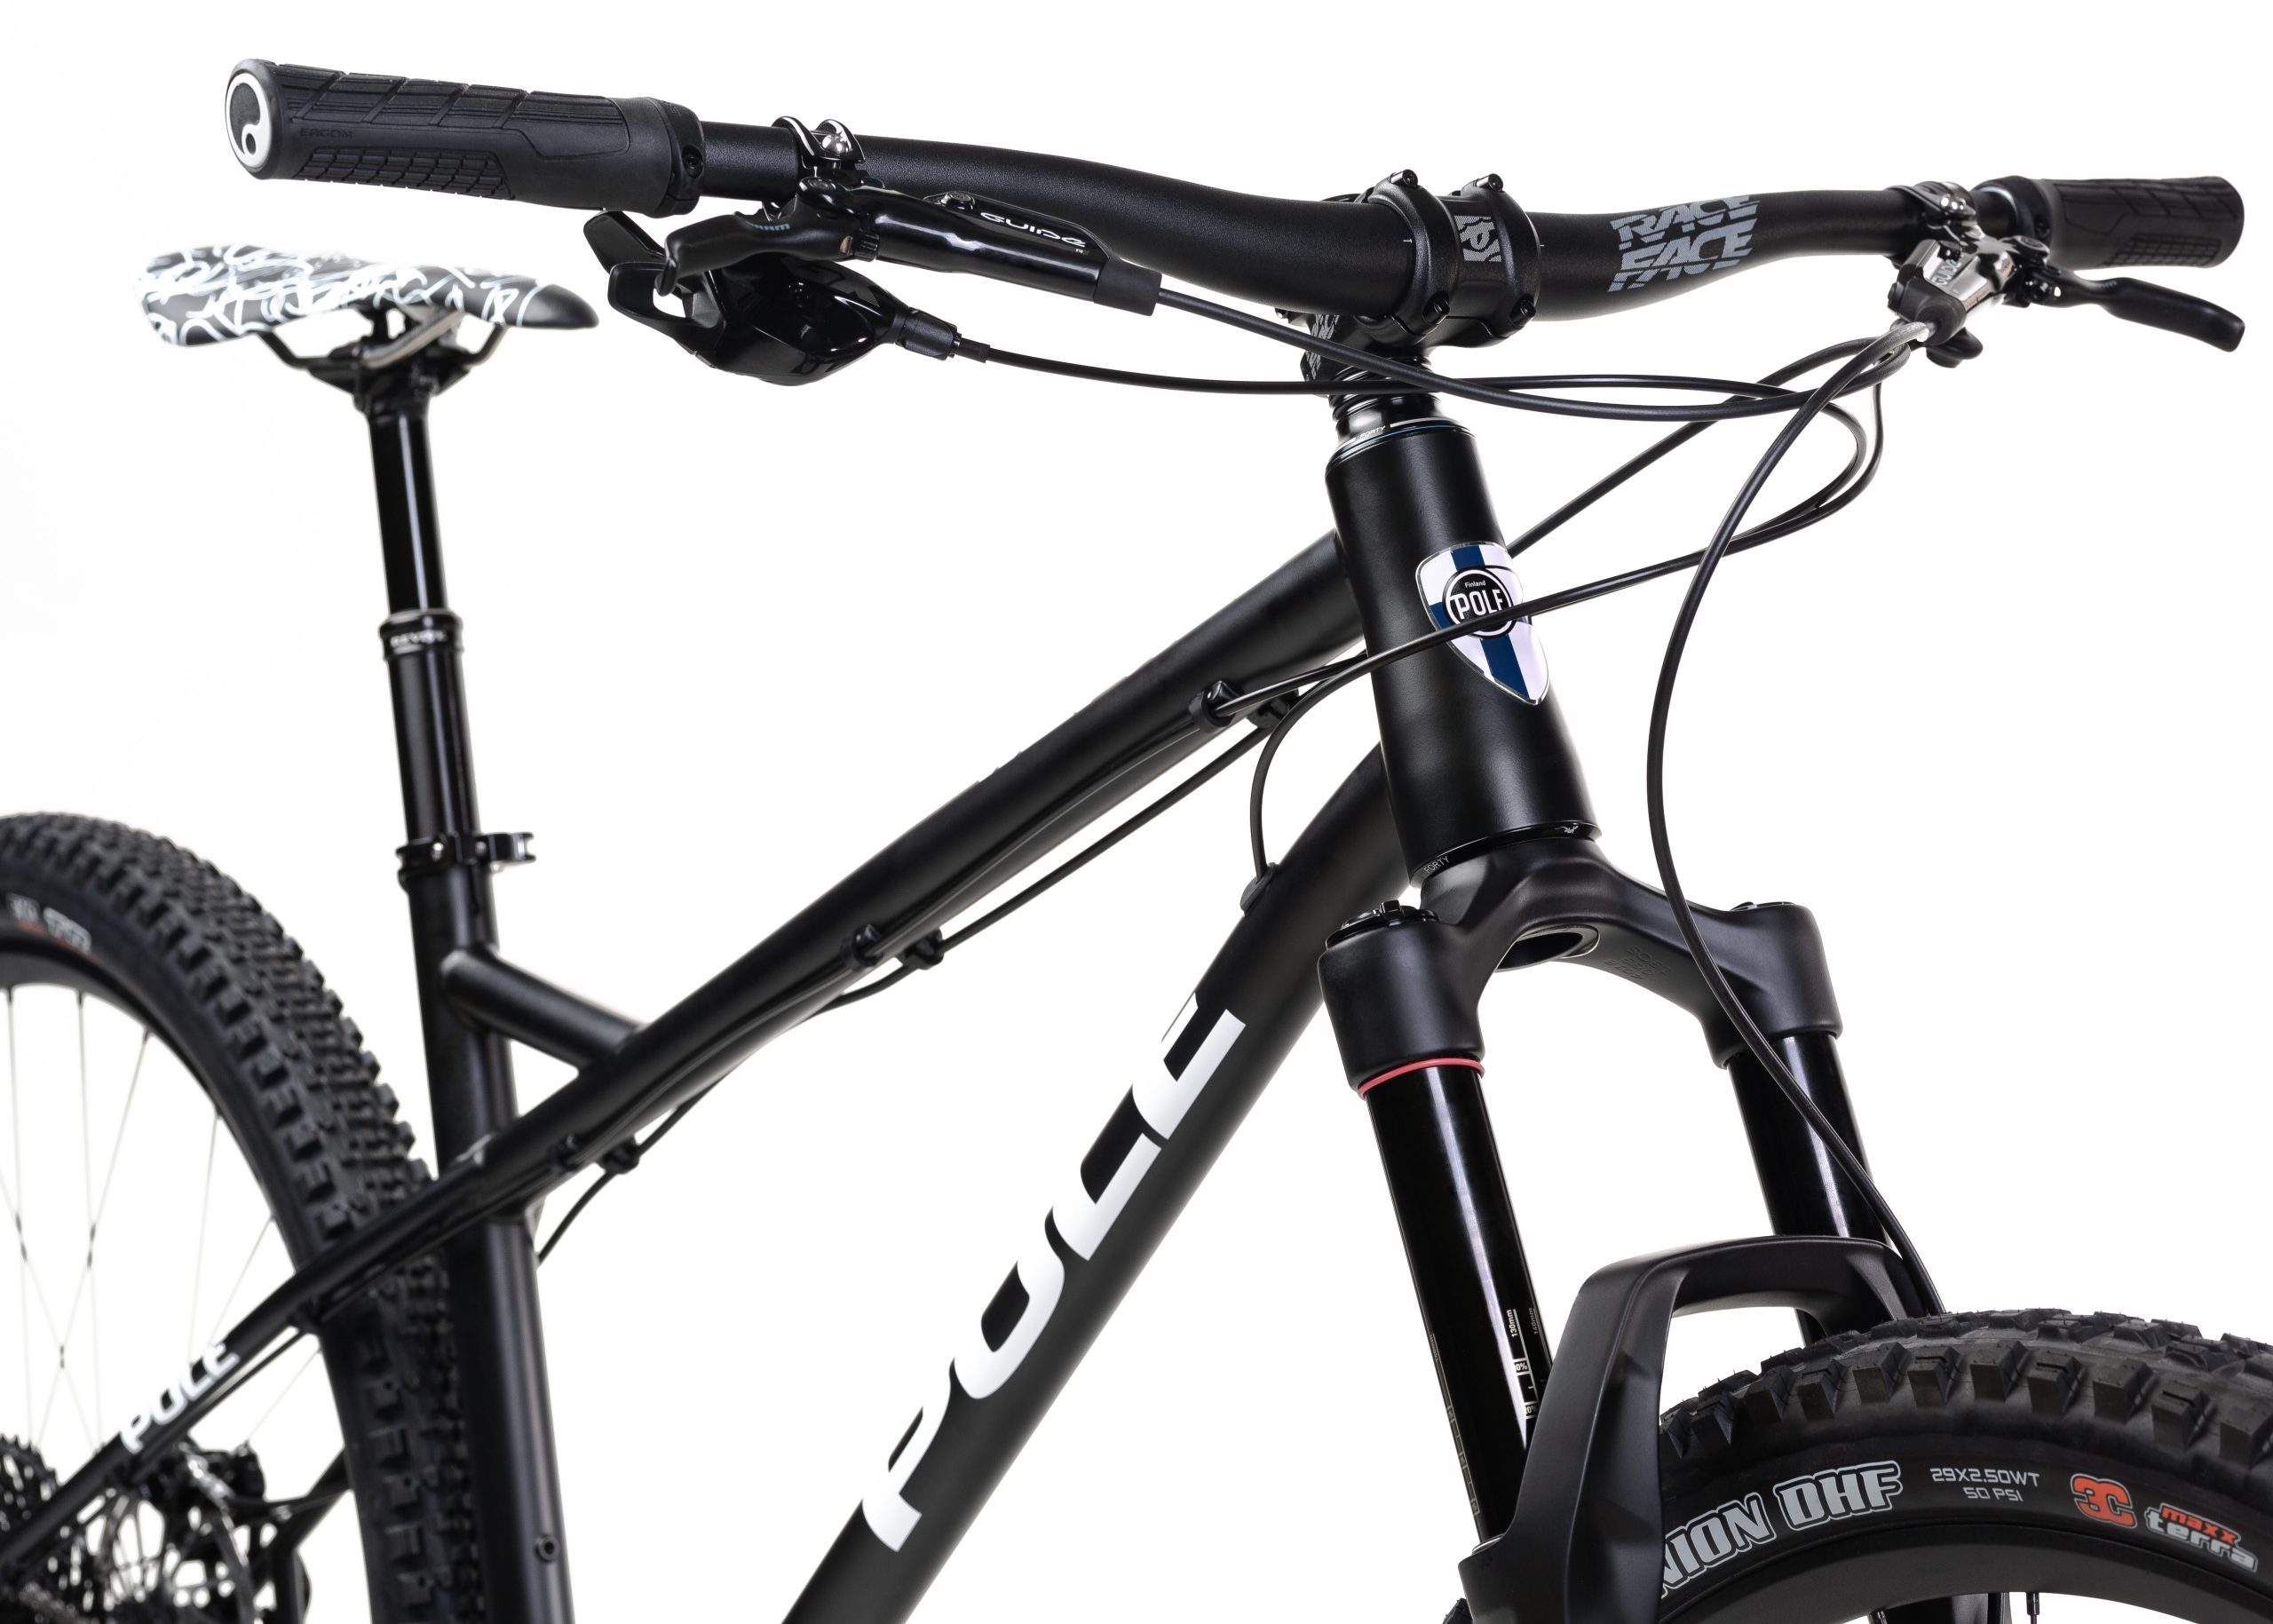 Pole's Upcoming Taival Is an All-Mountain Machine Built With